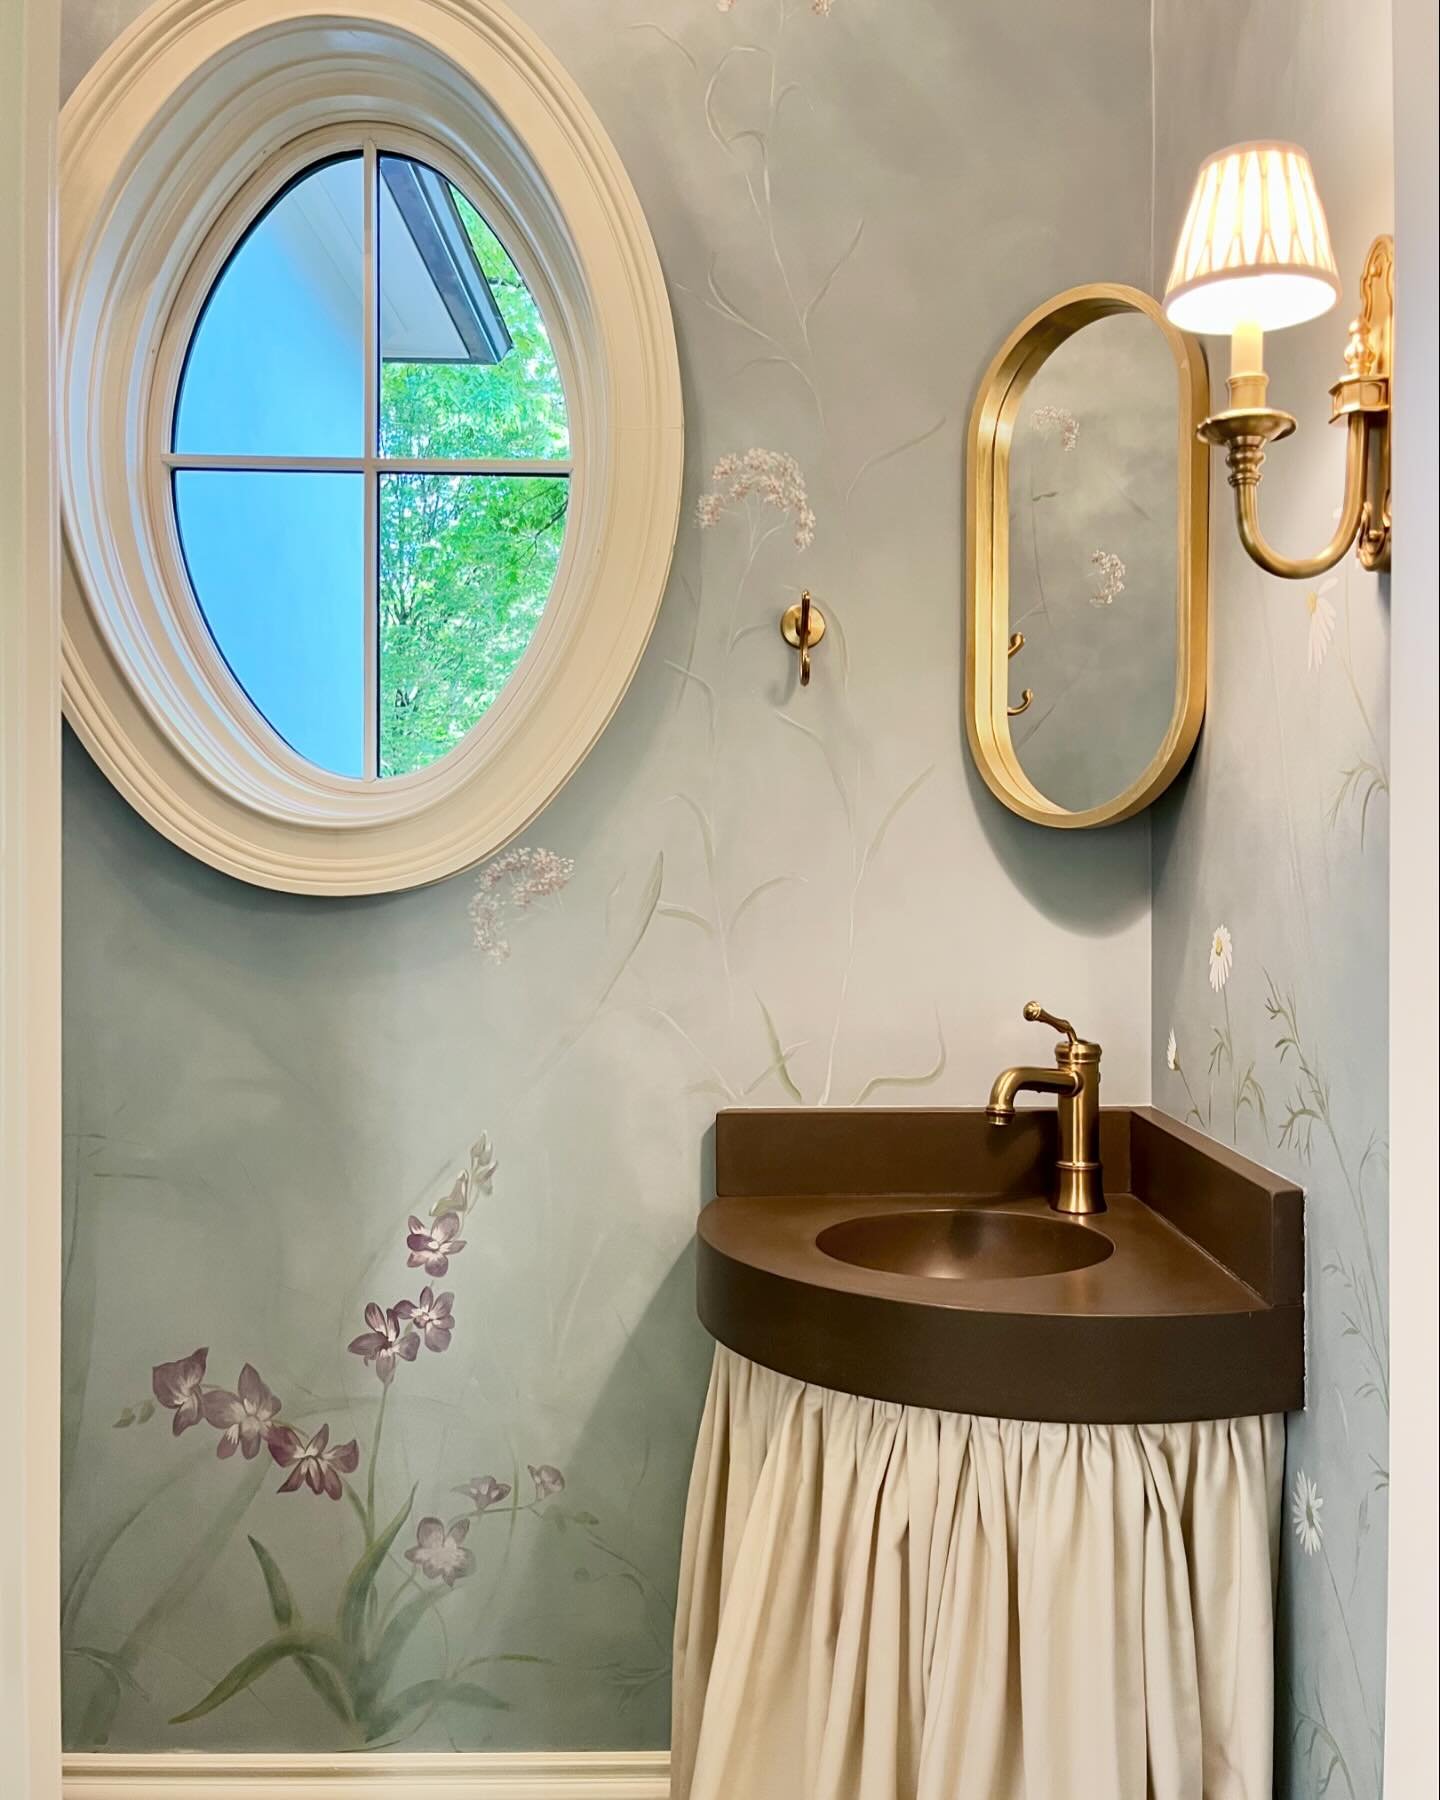 Isn&rsquo;t this French country modern powder room divine?! 😍 I&rsquo;m so grateful for my wonderful clients who invited me to paint this mural in Atlanta. 🙏

I love incorporating clients&rsquo; favorite plants into the murals, in this case, purple